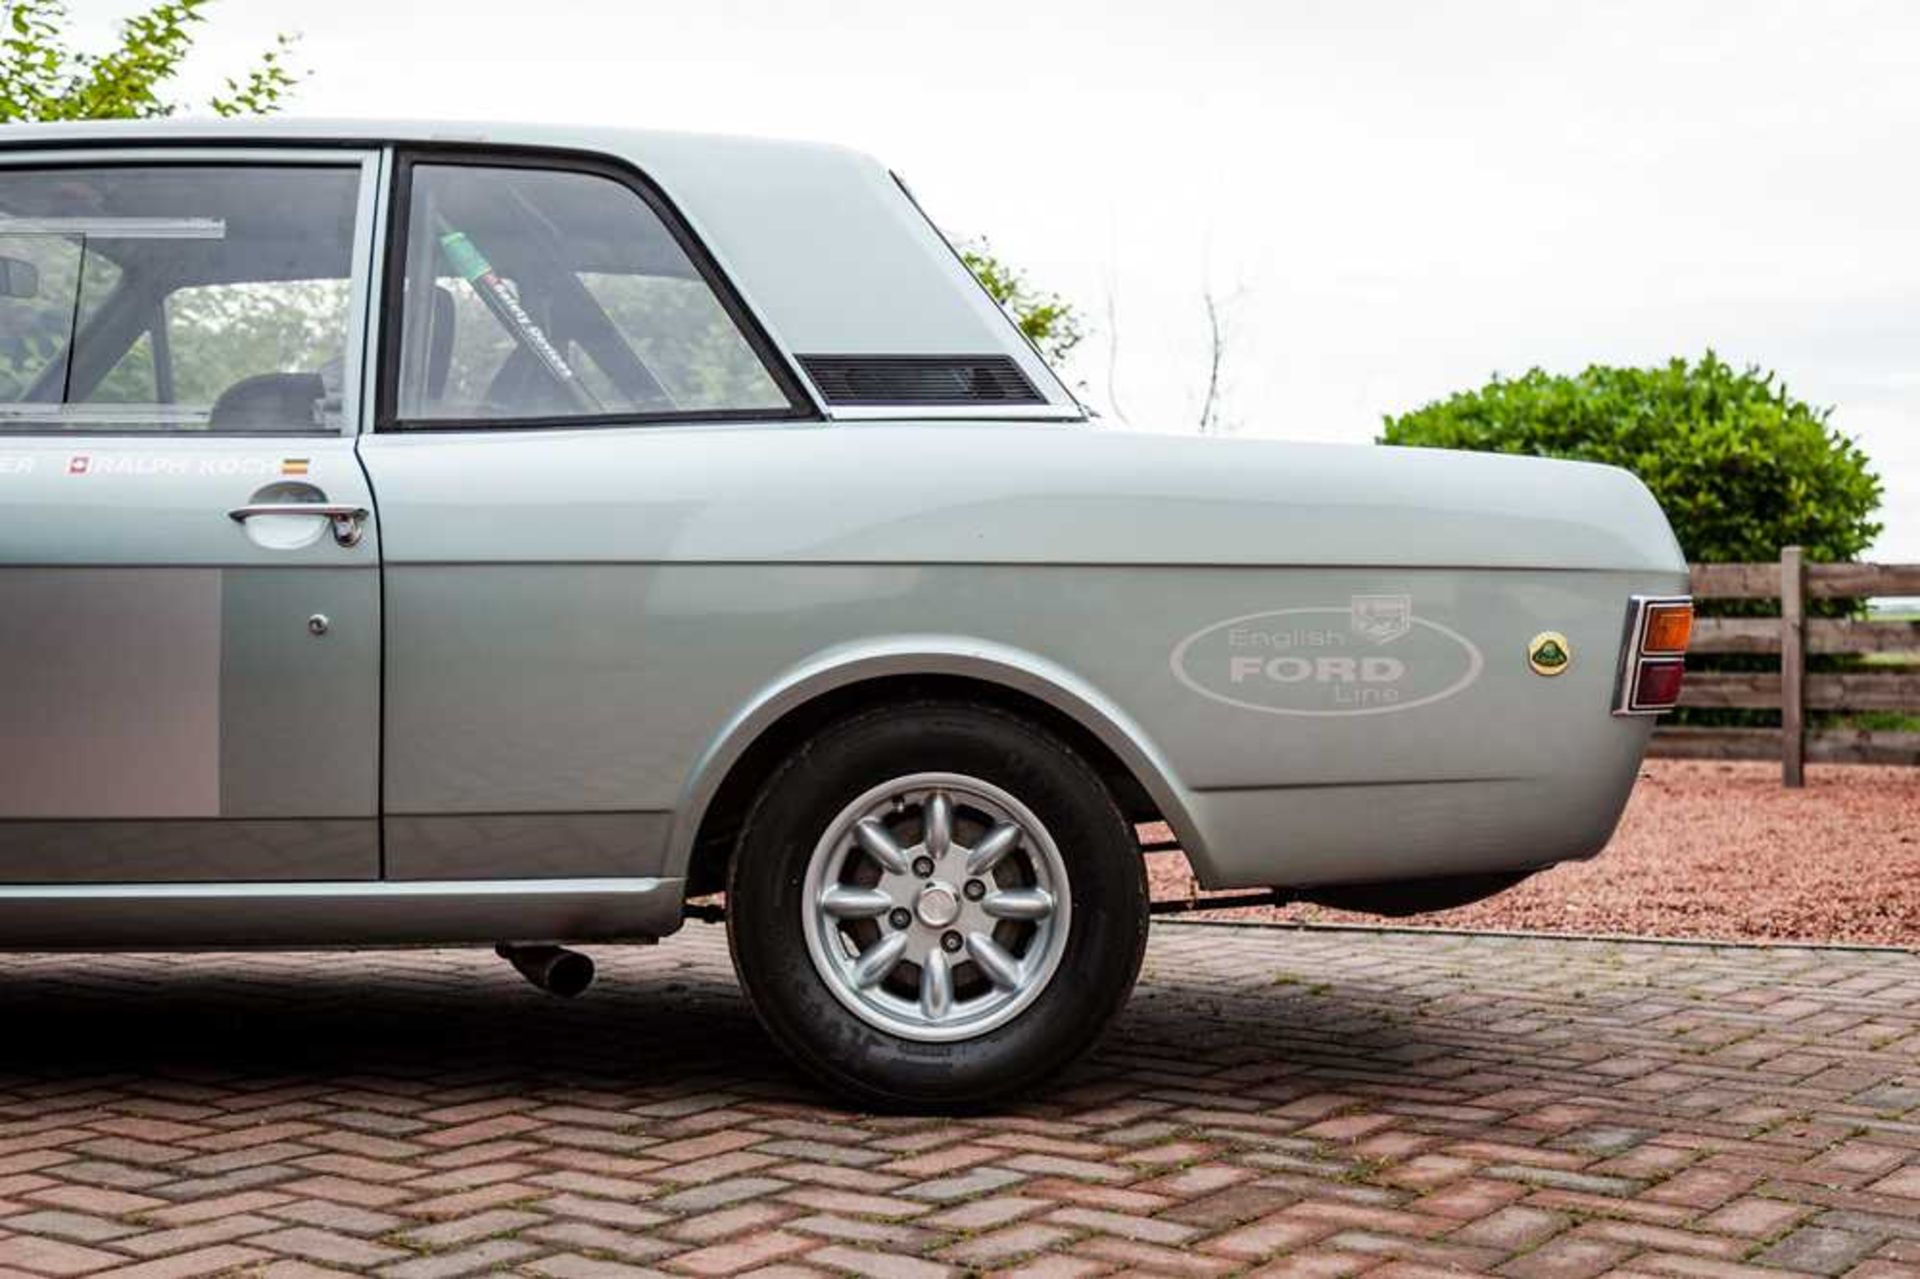 1969 Ford Cortina 'Lotus' Competition Saloon Powered by a 1598cc FIA-legal Lotus Twin-Cam with Twin - Image 18 of 55